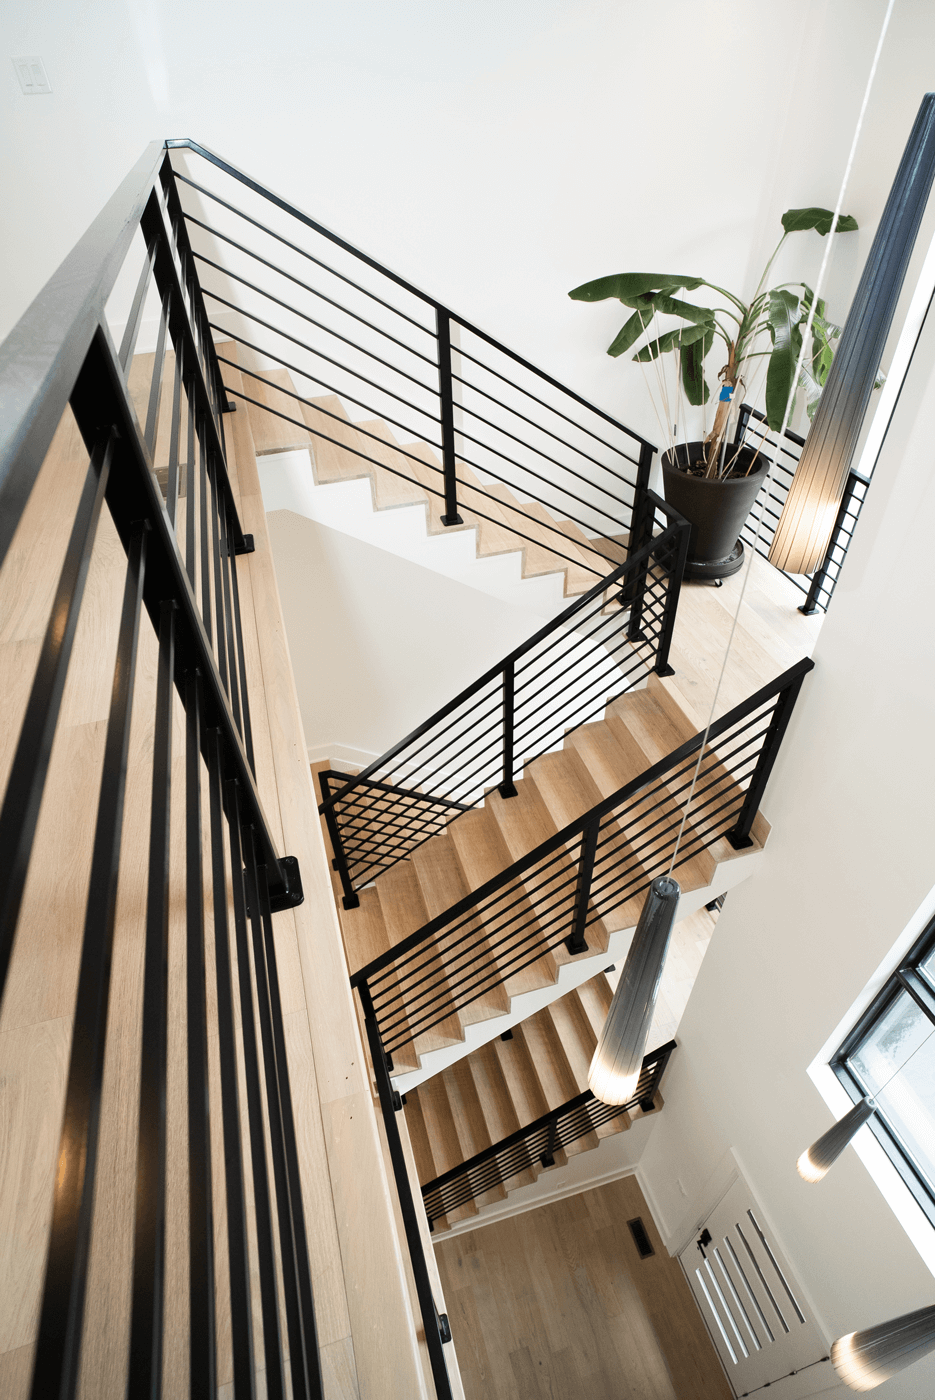 A downward view of custom modern railing throughout multiple levels of a home.